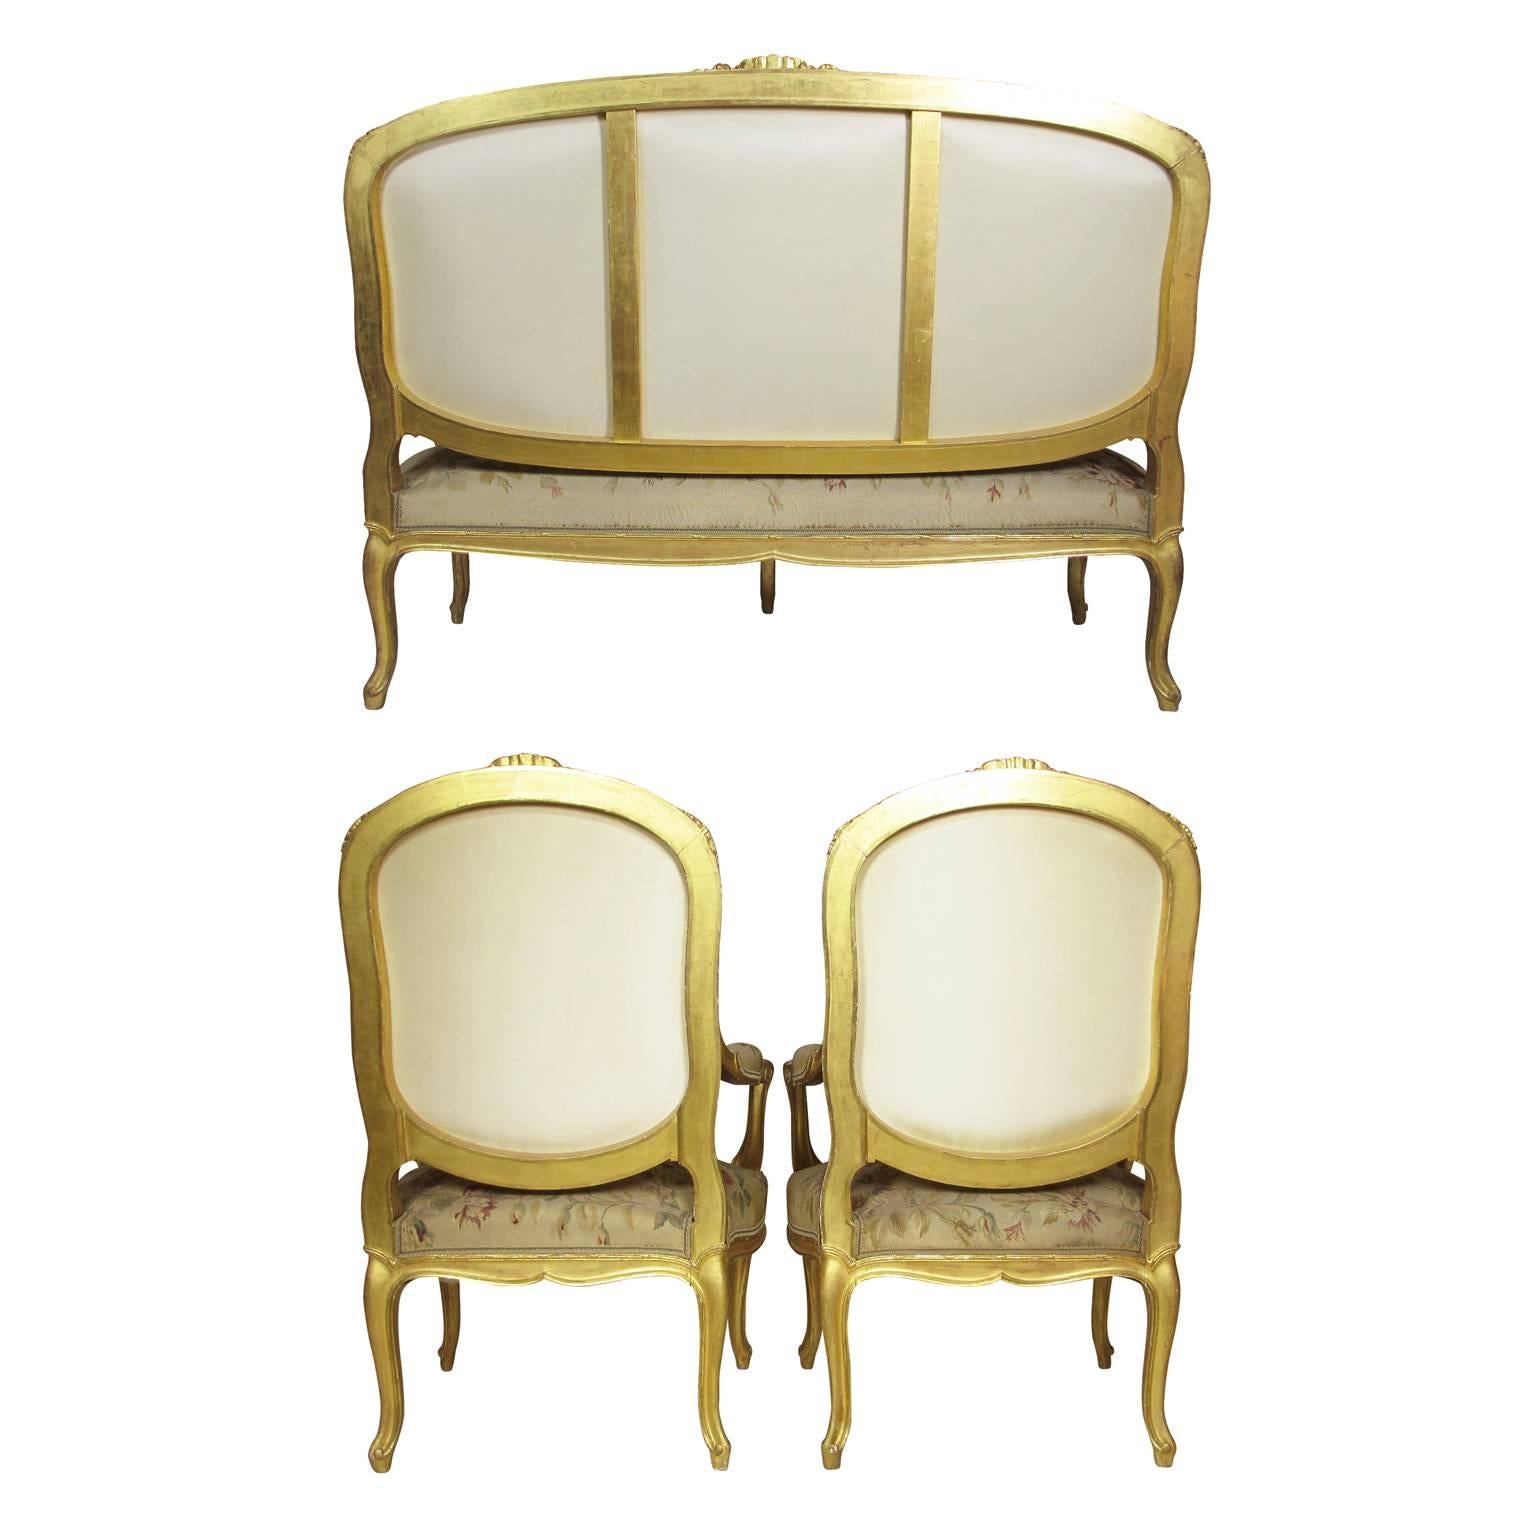 French 19th Century Louis XV Style Three-Piece Giltwood and Aubusson Salon Suite For Sale 5